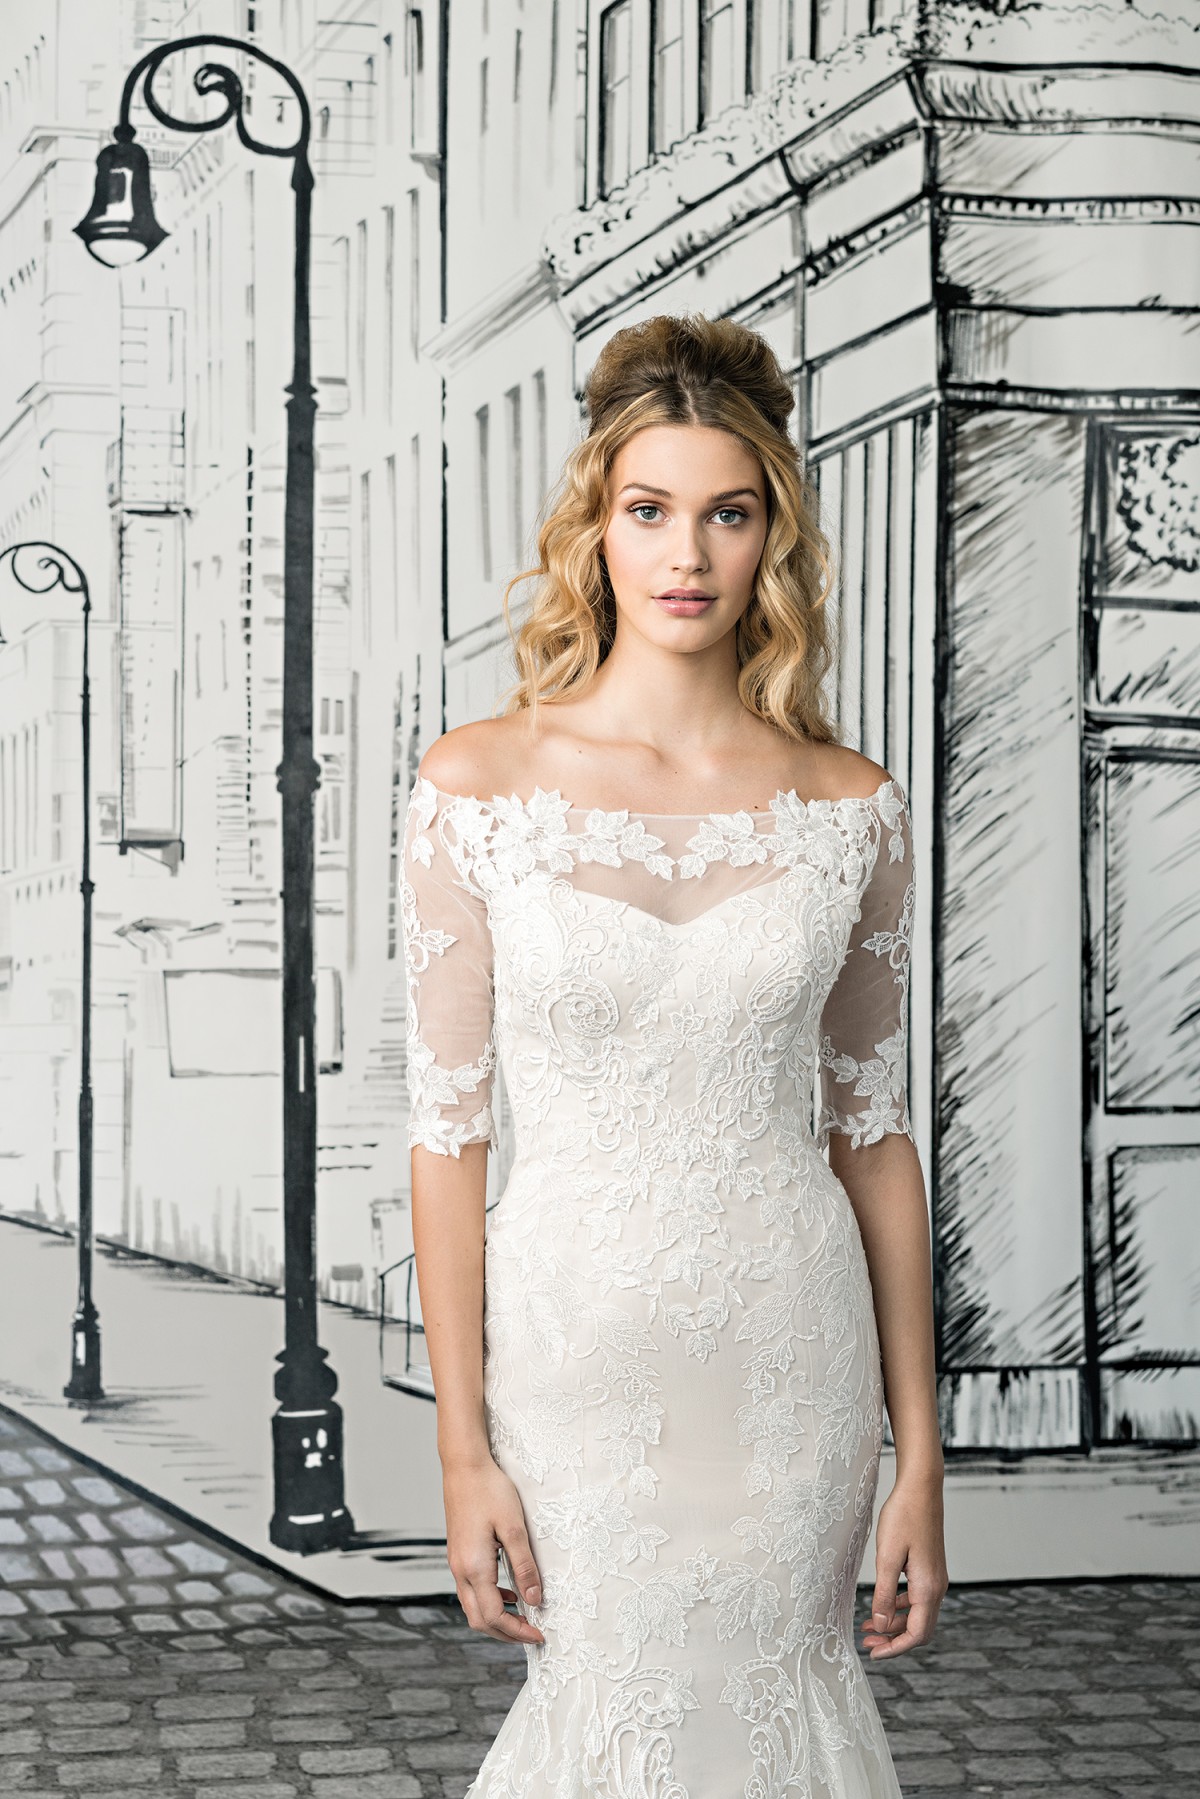 Ivy - Size 12 - Justin Alexander 8903, Off the shoulder lace Mermaid wedding dress with elbow length lace sleeves available at Blessings Bridal Boutique, Brighton, East Sussex, BN1 5GG. Telephone: 01273 505766